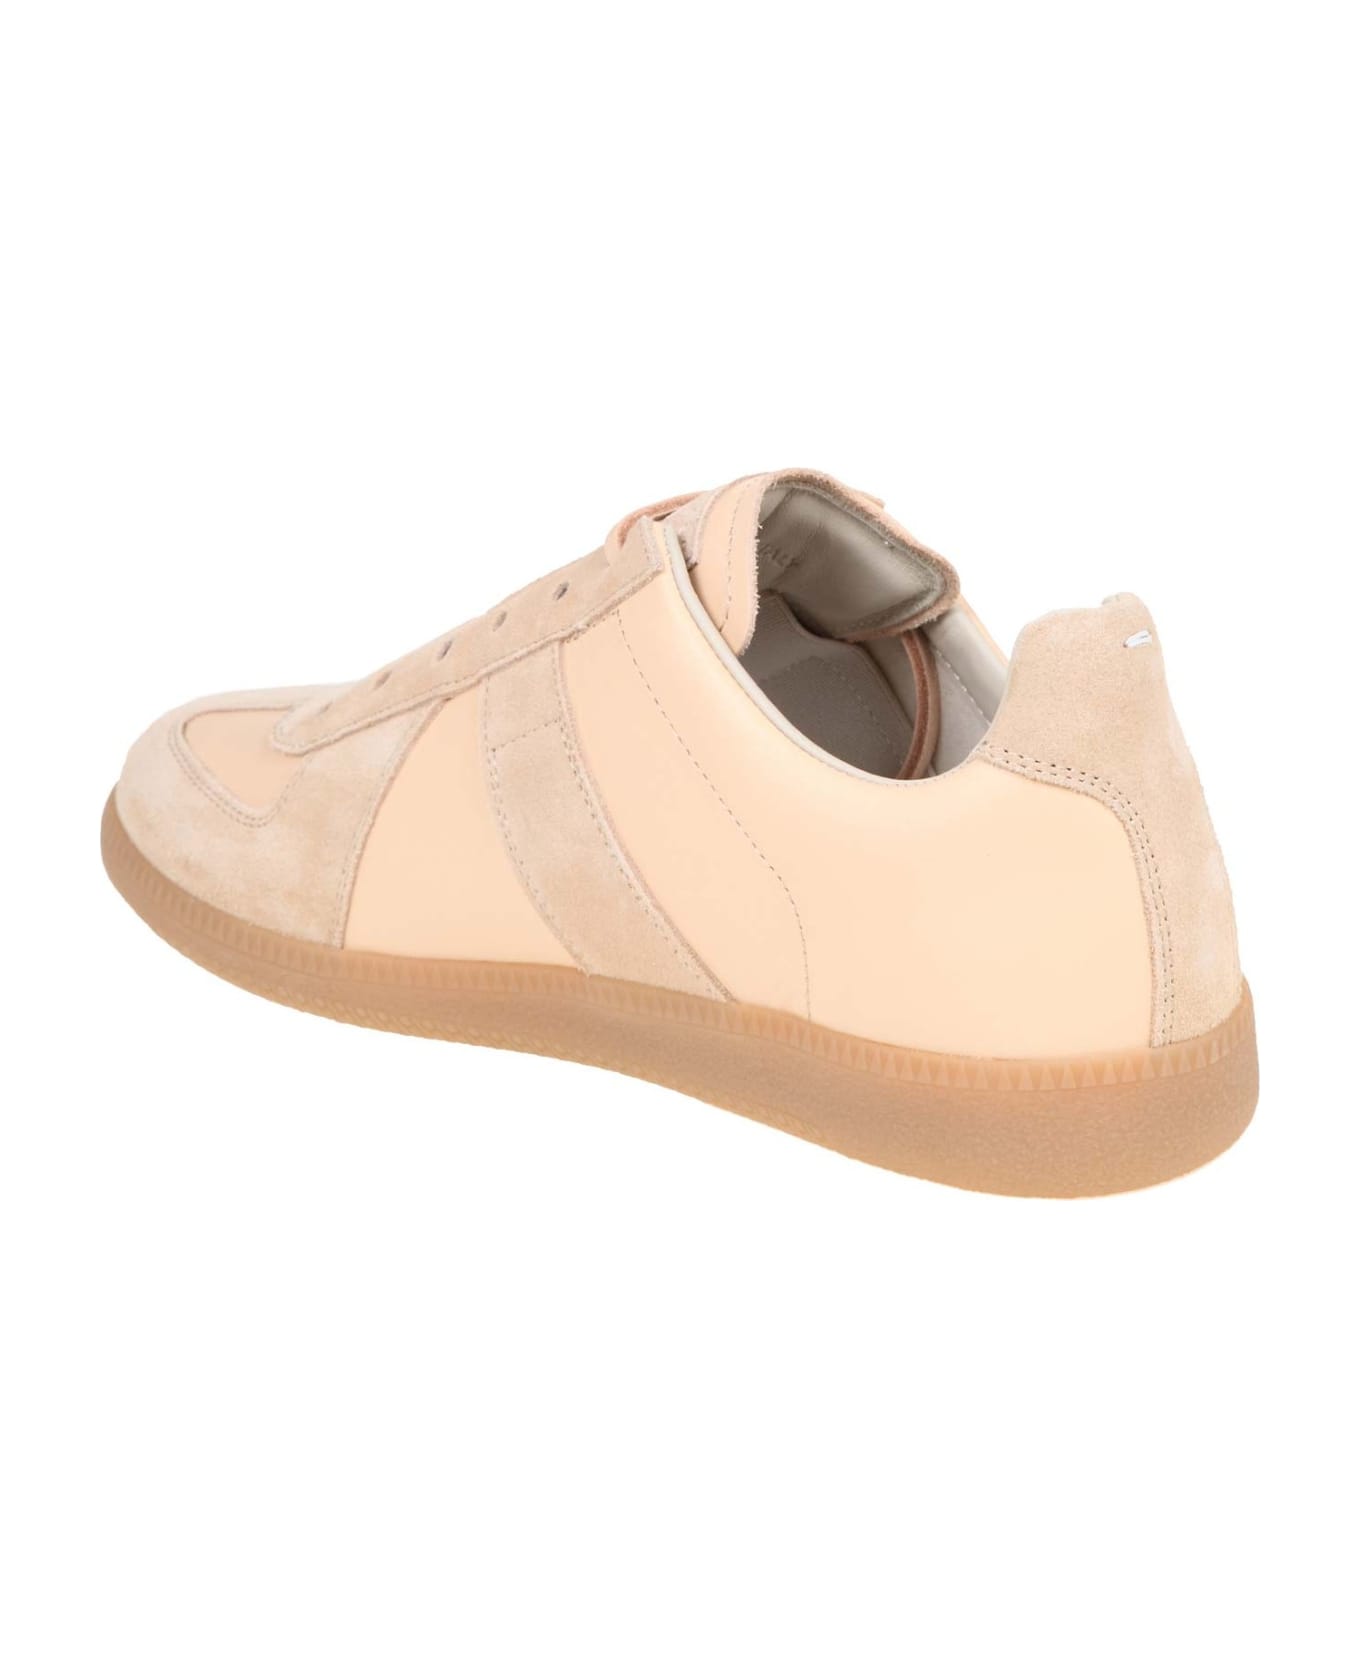 Maison Margiela Sneakers Replica In Leather And Suede - BEIGE